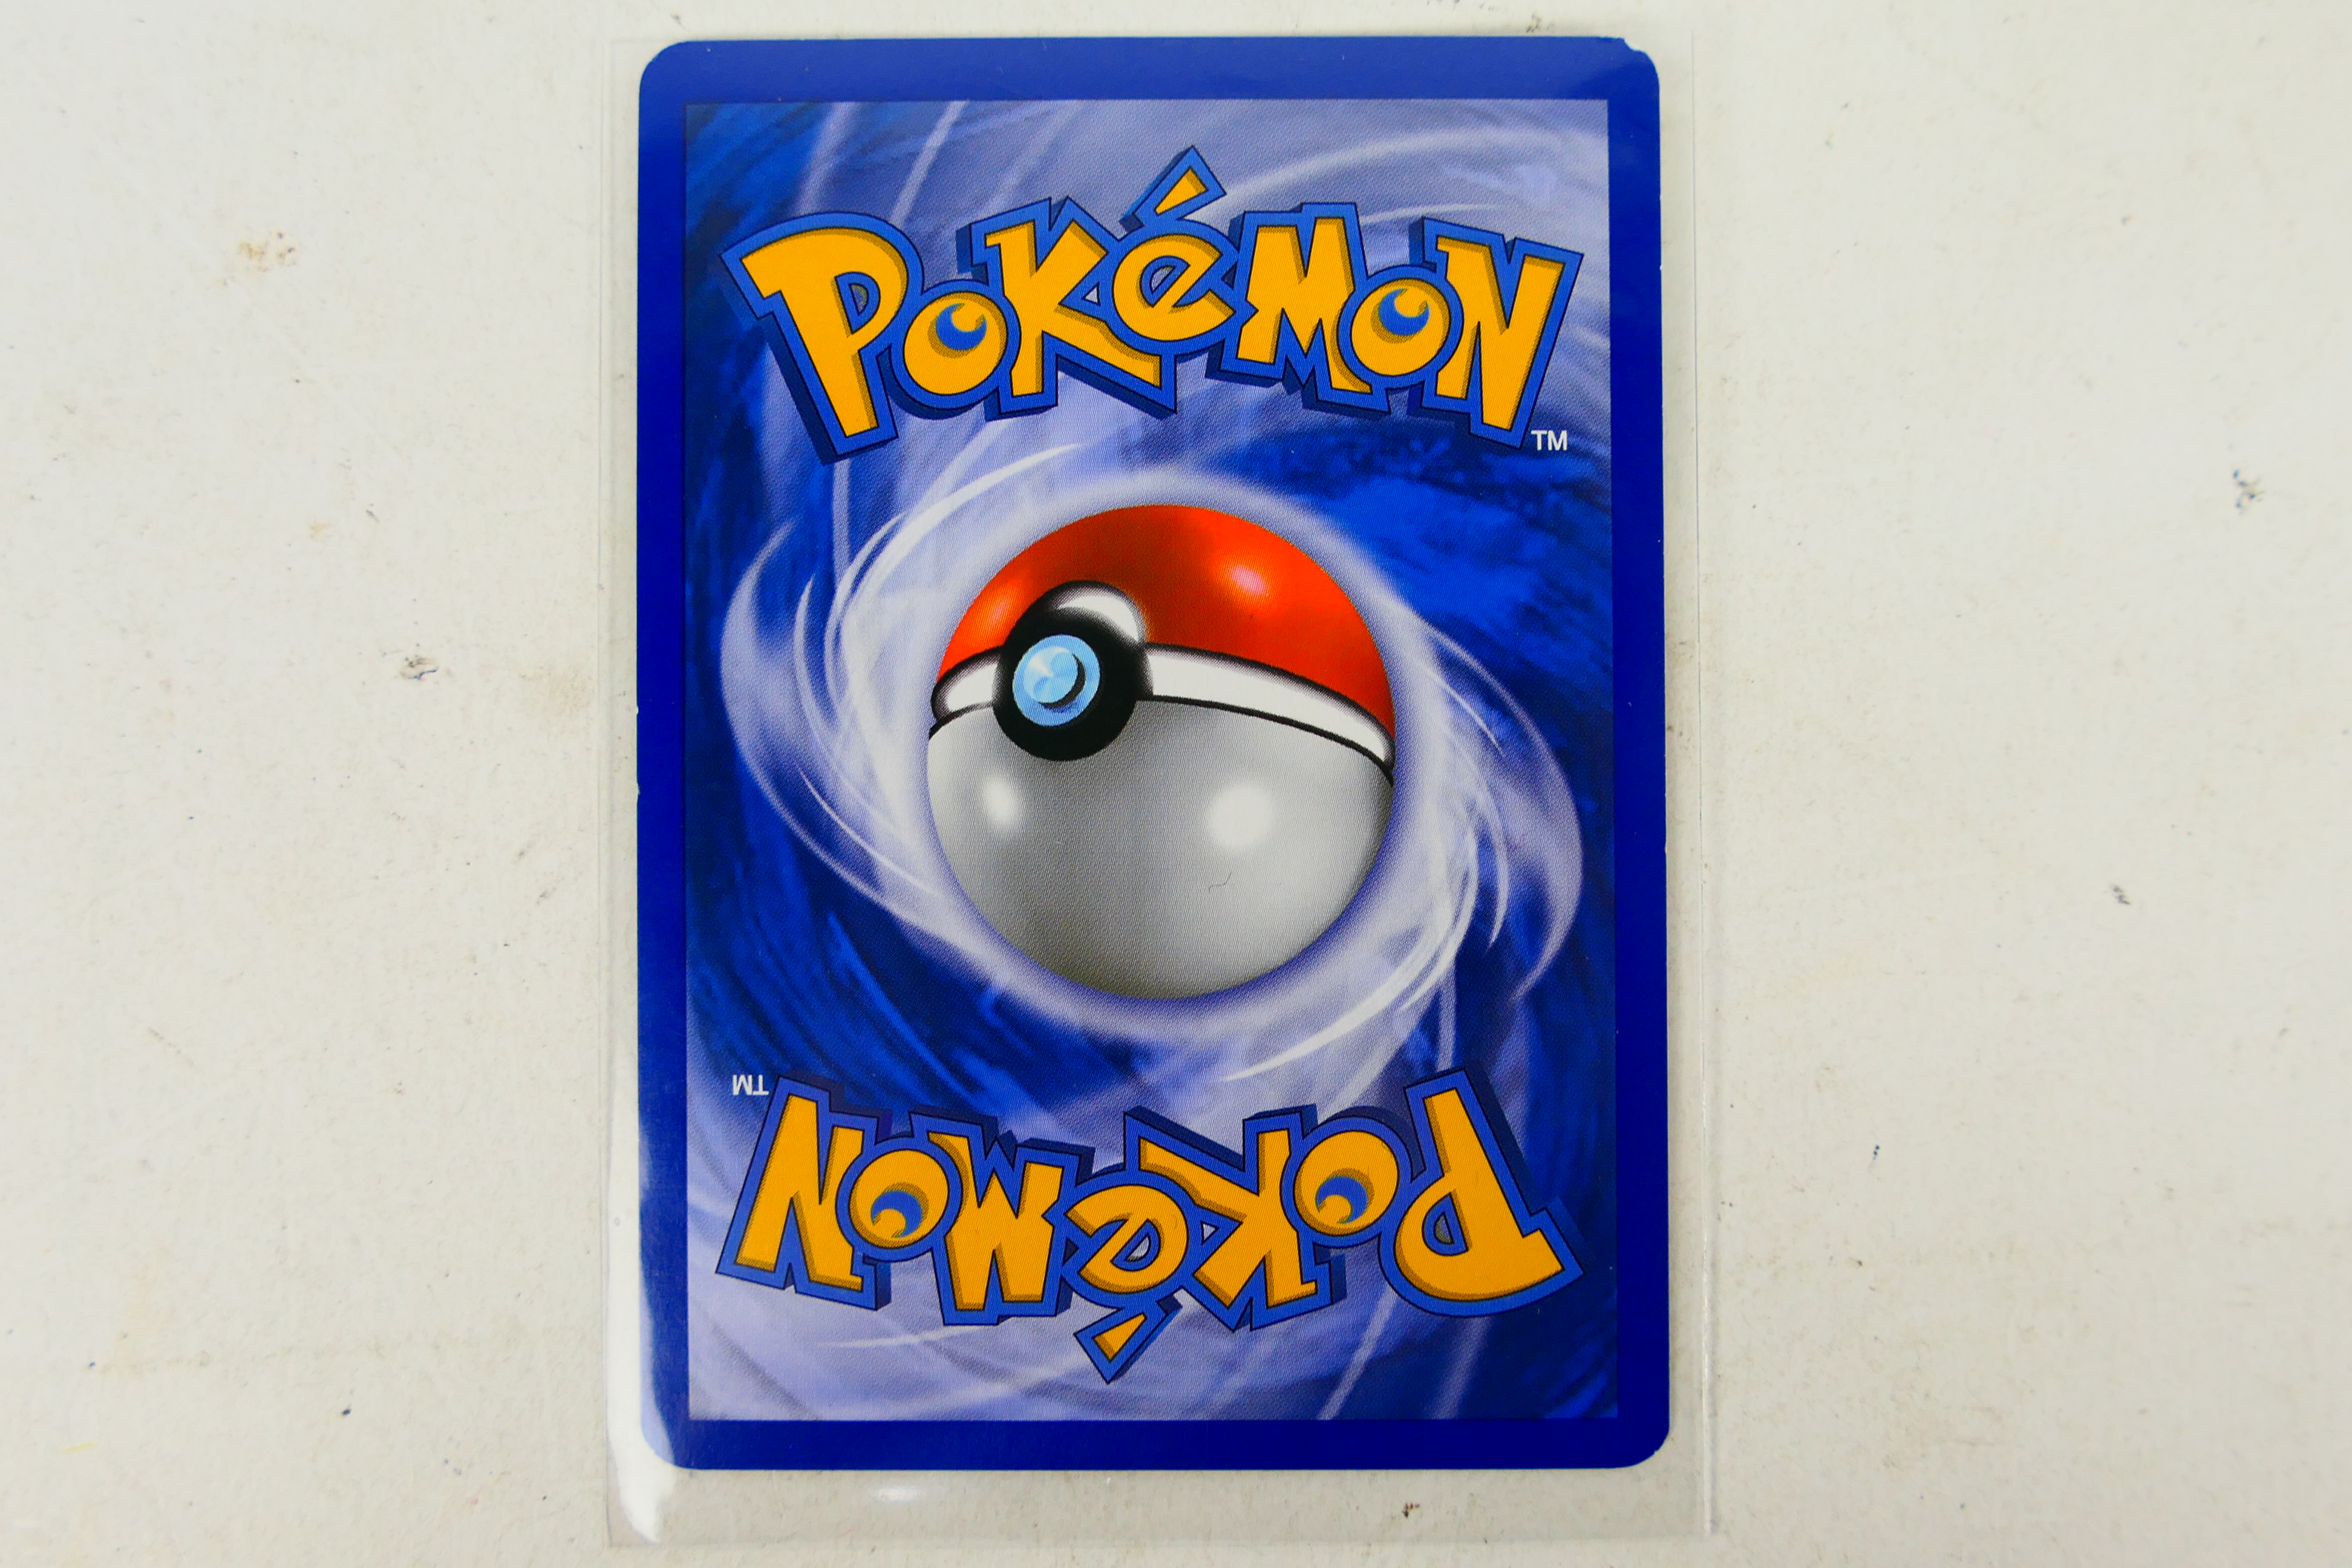 Pokemon - A Pokemon Battle Road Victory Medal Trainer Card for Spring 2008 / 2009, - Image 5 of 5